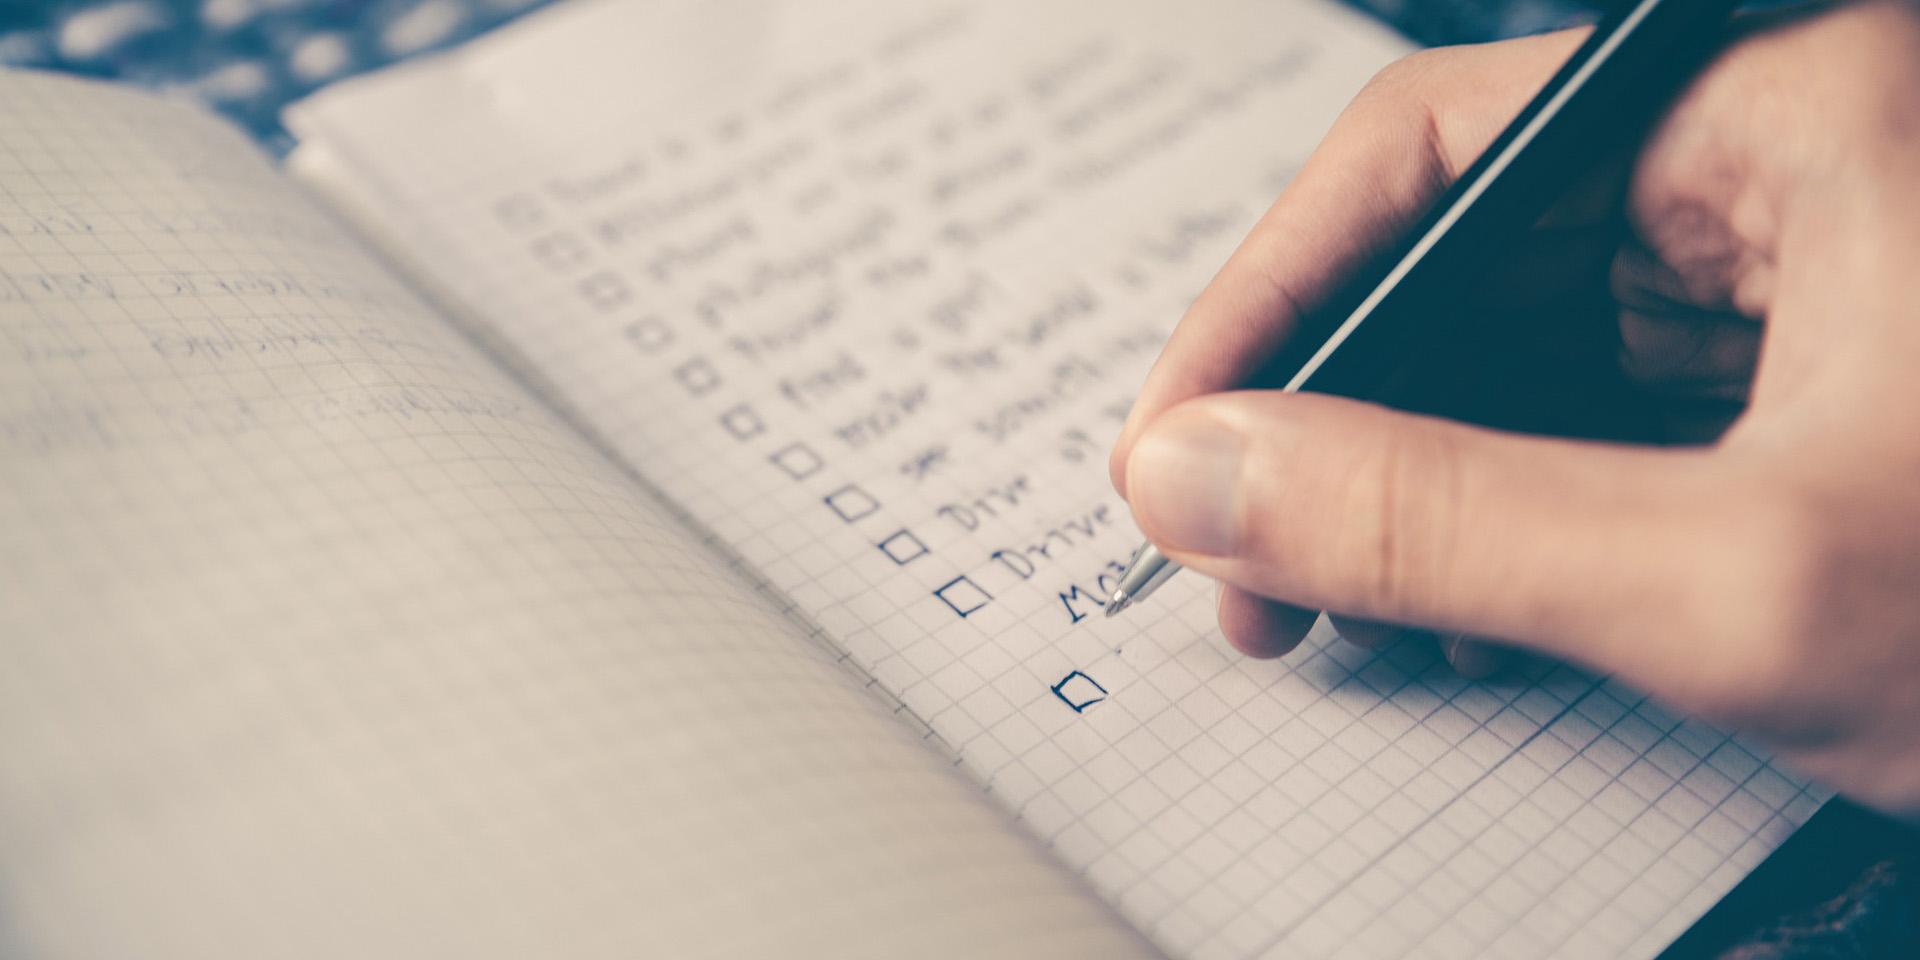 5 Best Practices on Journal Entry Automation